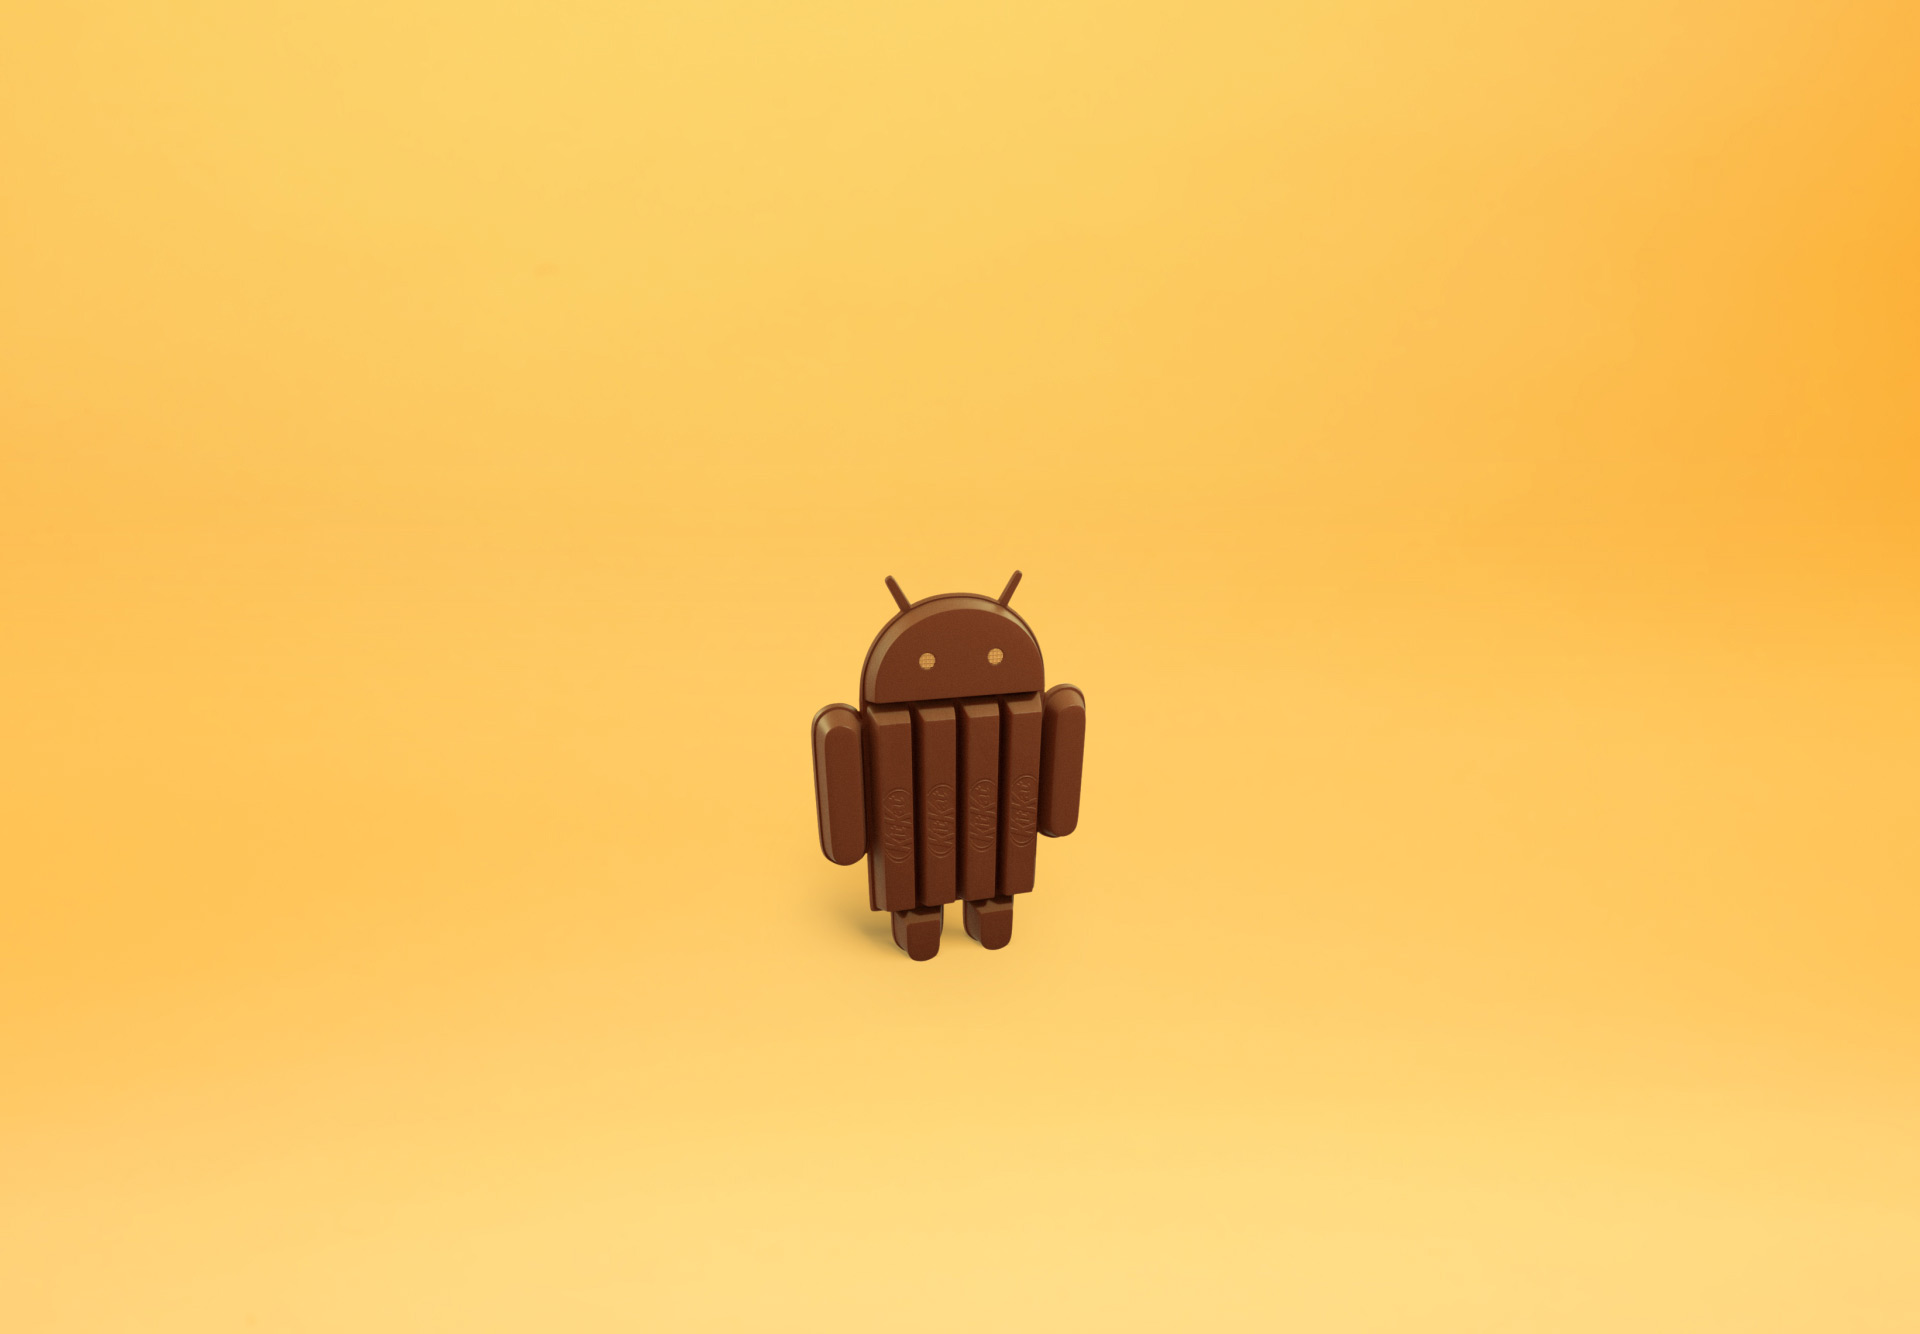 New Android Version Includes This Sweet Kit Kat Themed Wallpaper